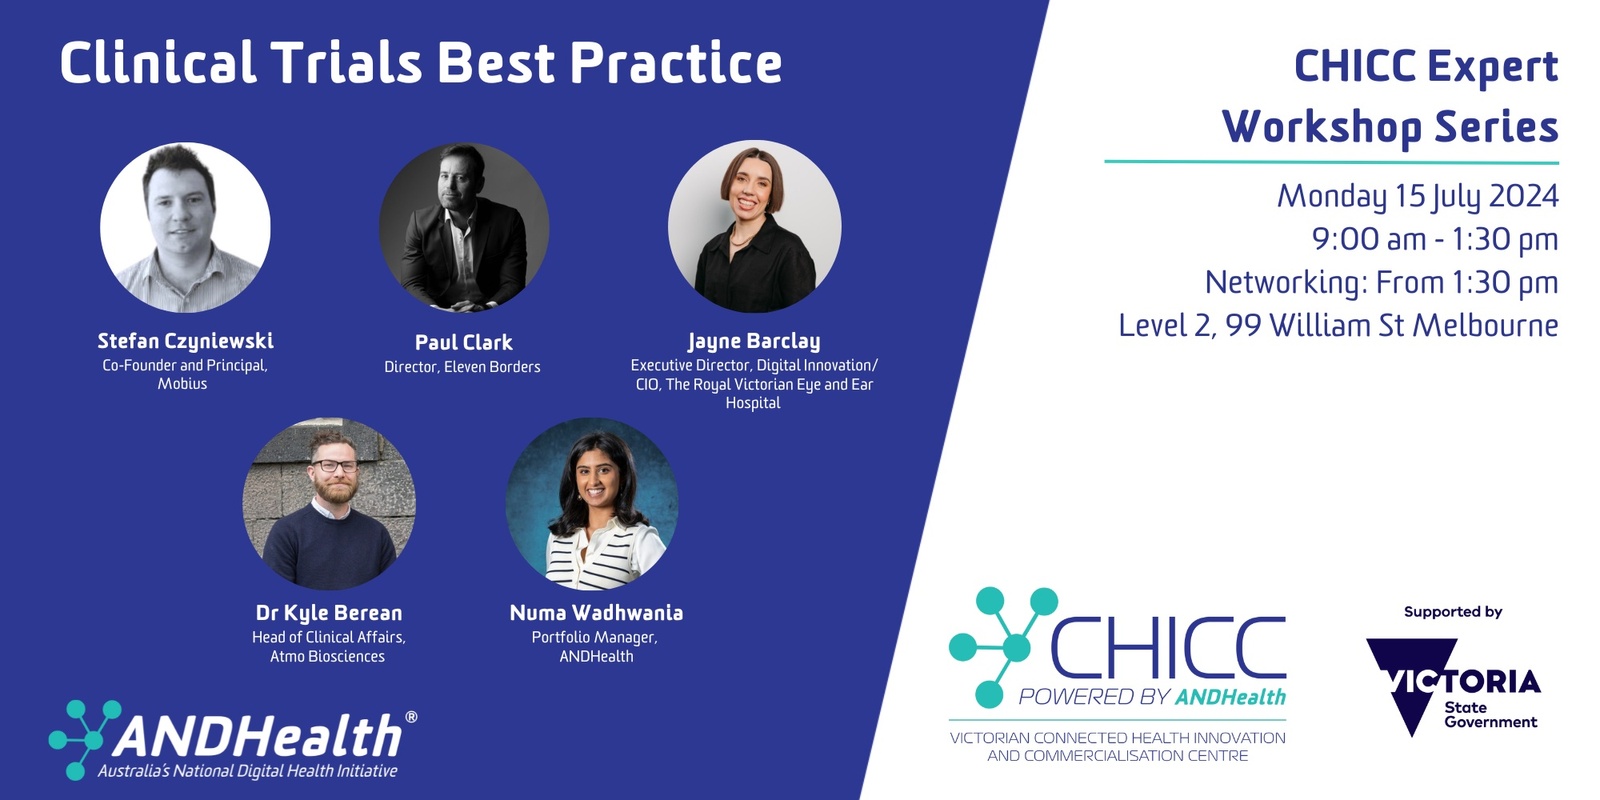 Banner image for CHICC Expert Workshop: Clinical Trials Best Practice